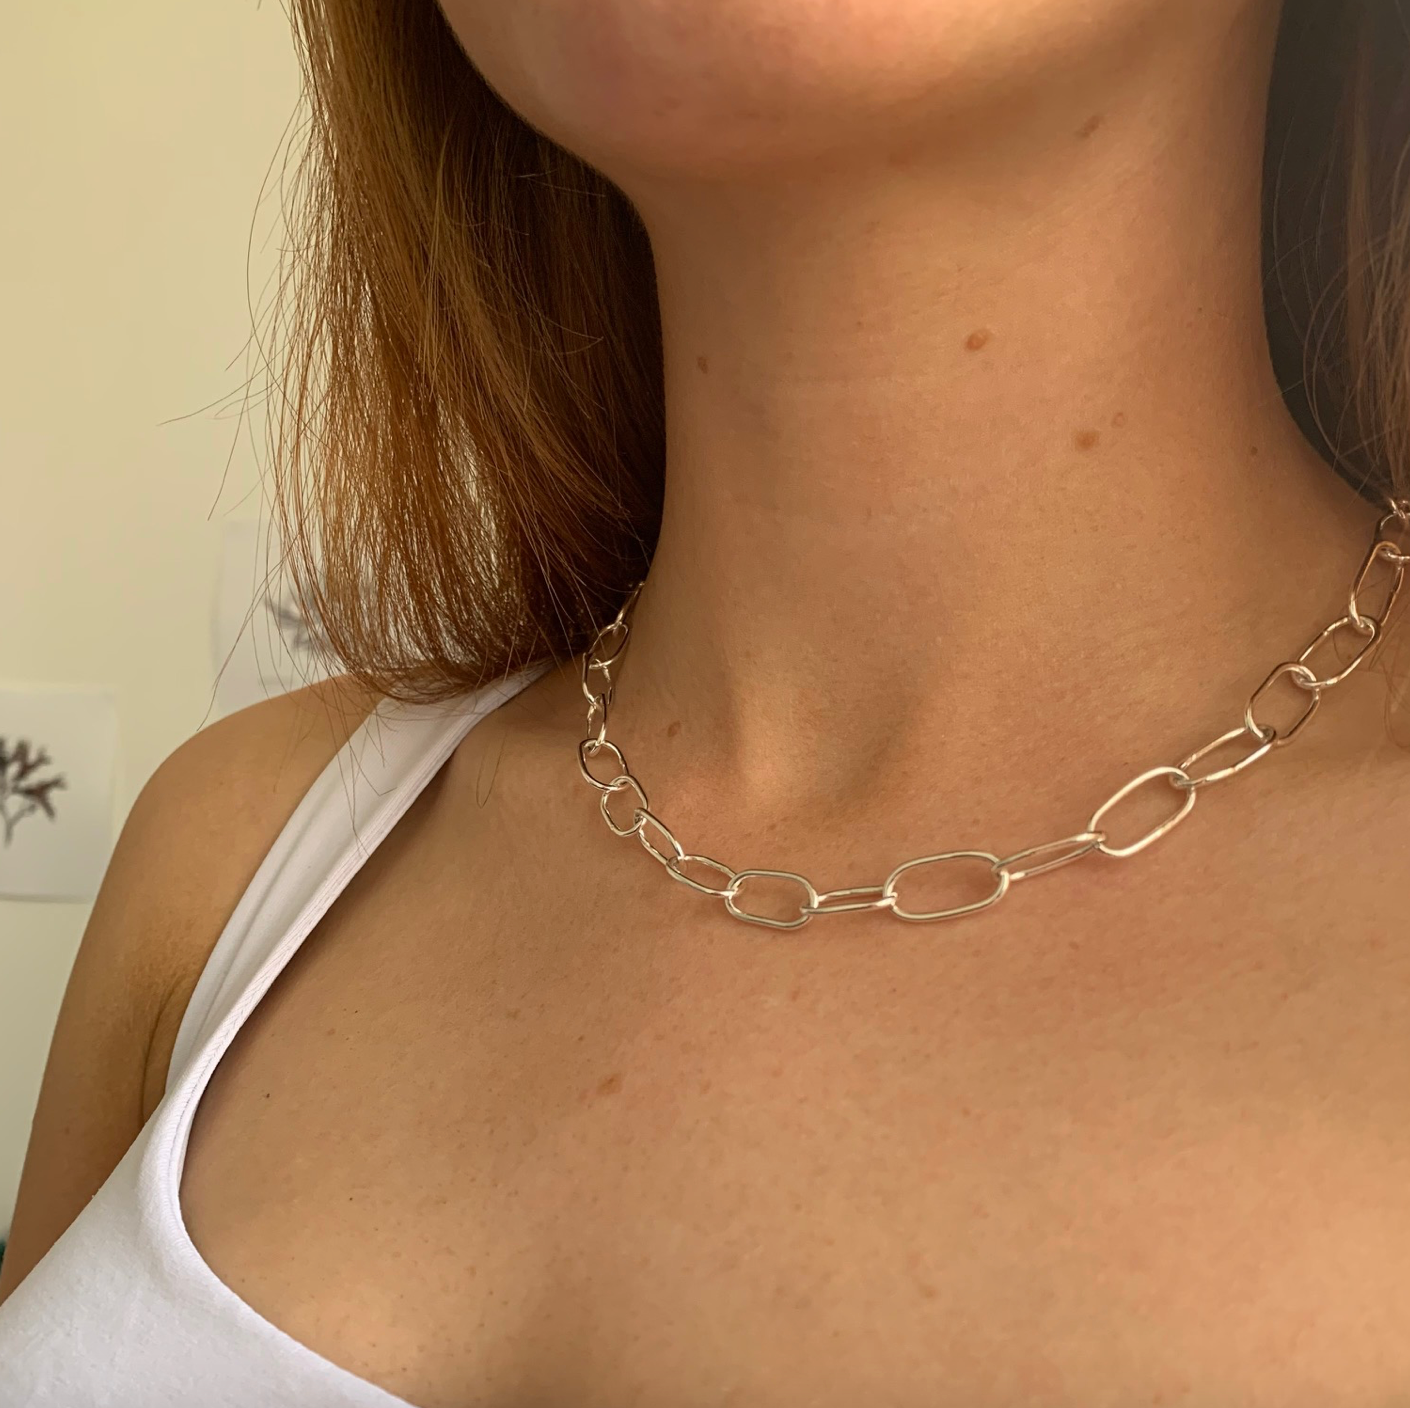 The pastille chain necklace, handmade from sterling silver oval links. Pictured on a model.